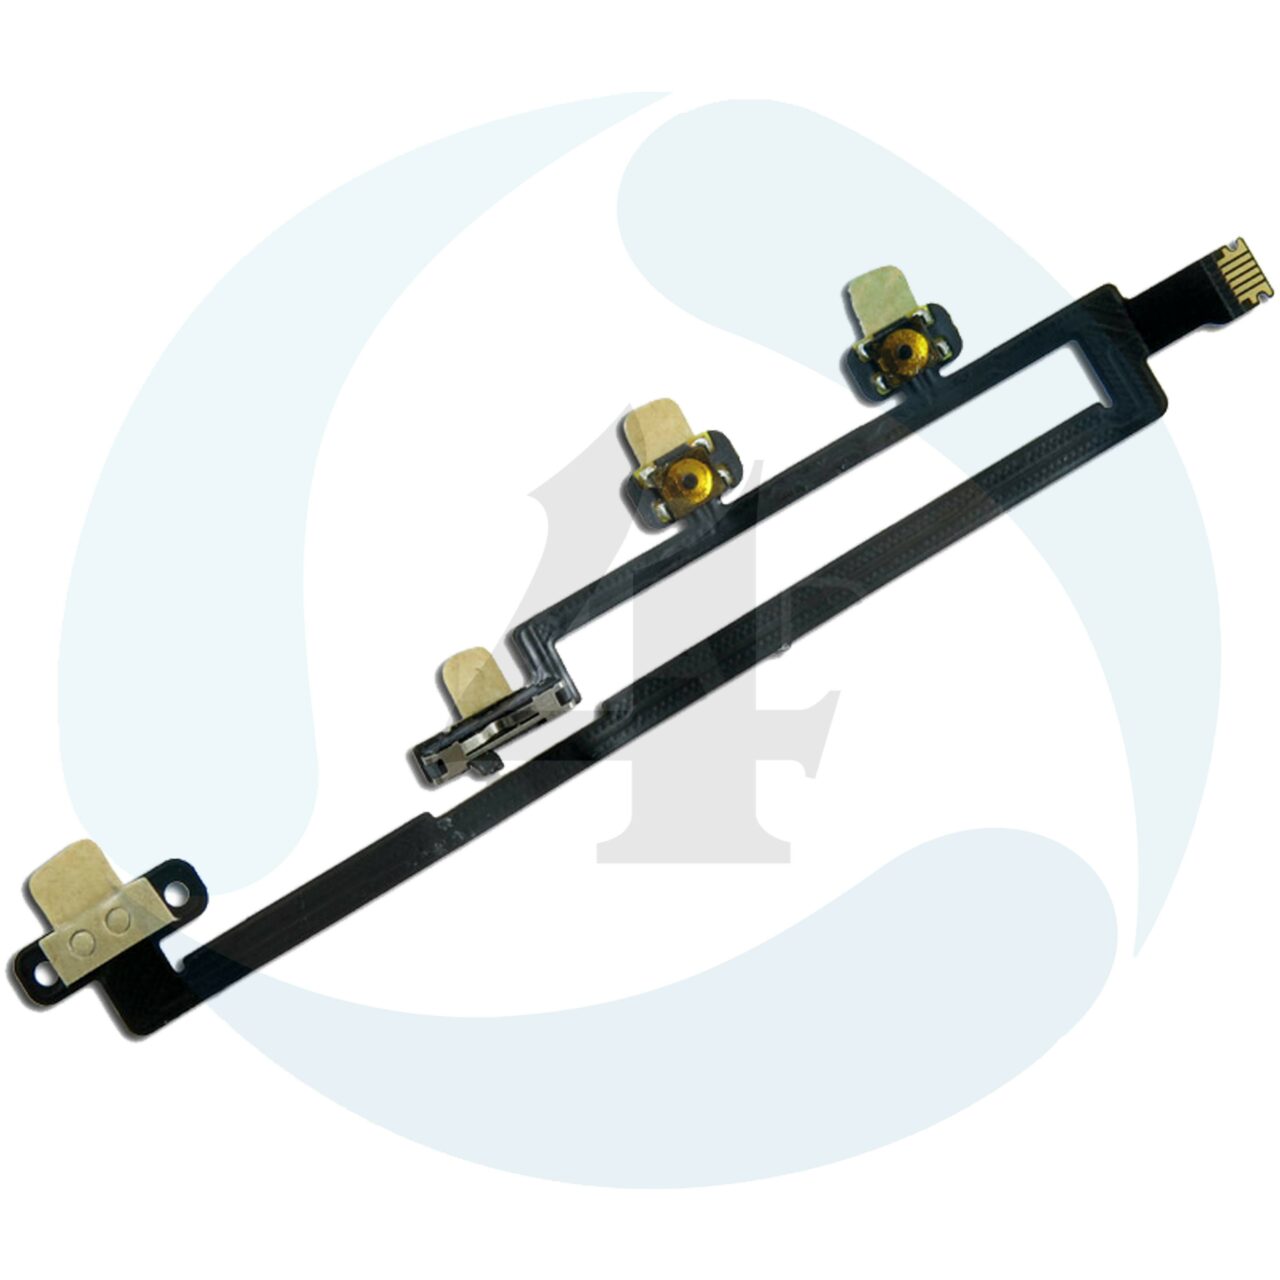 Apple i Pad power and volume button flex cable oem for ipad air ipad mini 1054 1000x1000